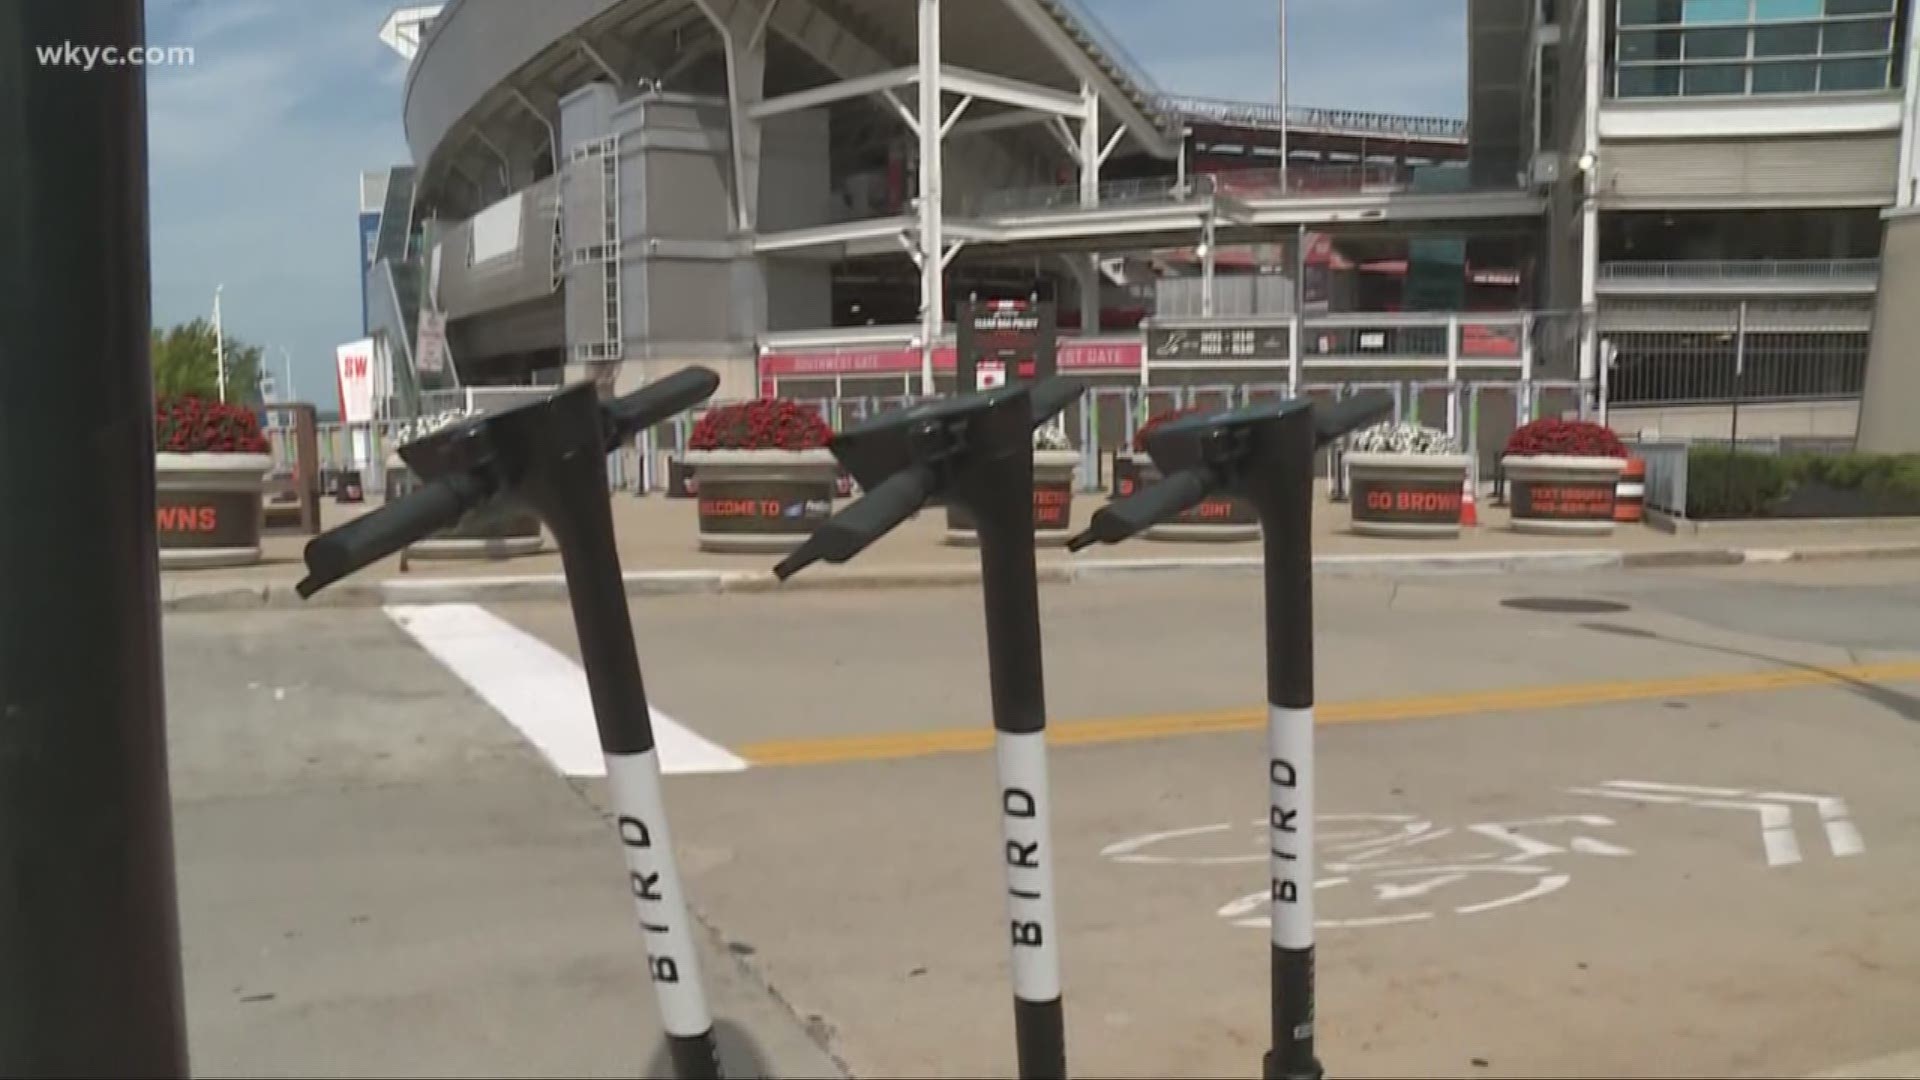 Bird is officially the word in Cleveland. Bird scooters made their official return to Cleveland Monday, one year after the popular e-scooters were removed from city streets for further consideration.